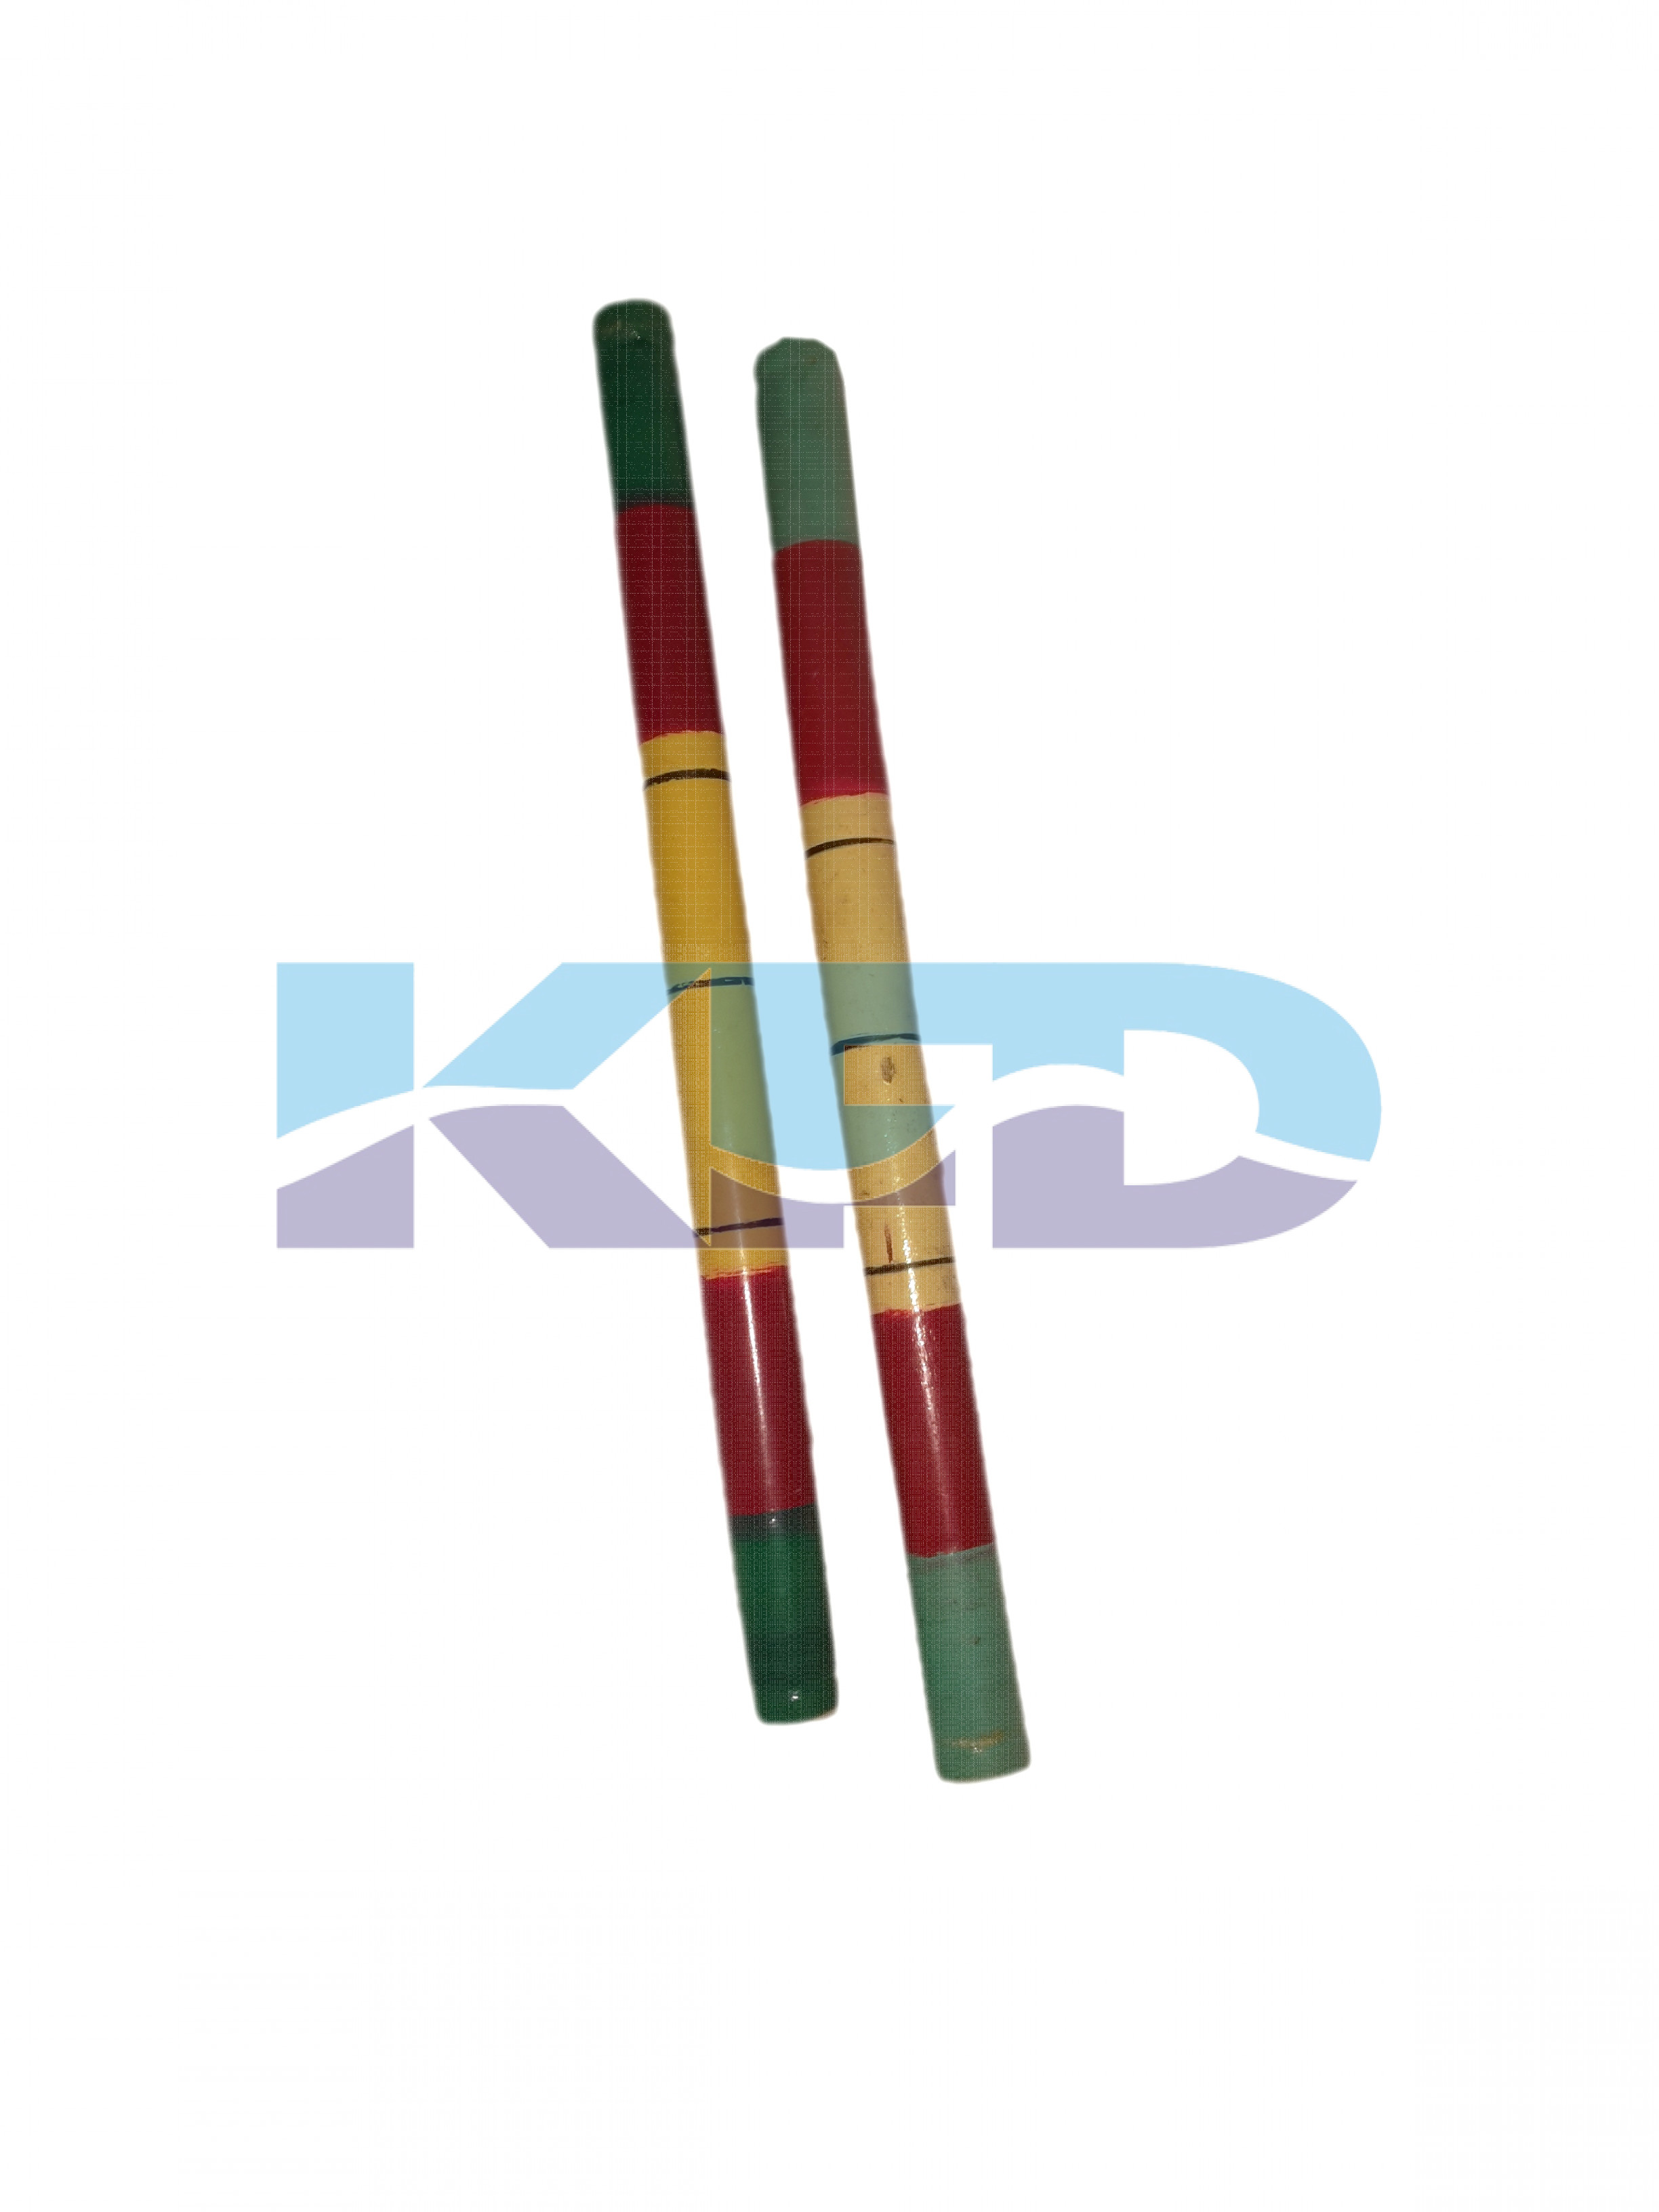 Dandiya Stick 6 Pair Accessories For Boys and Girls